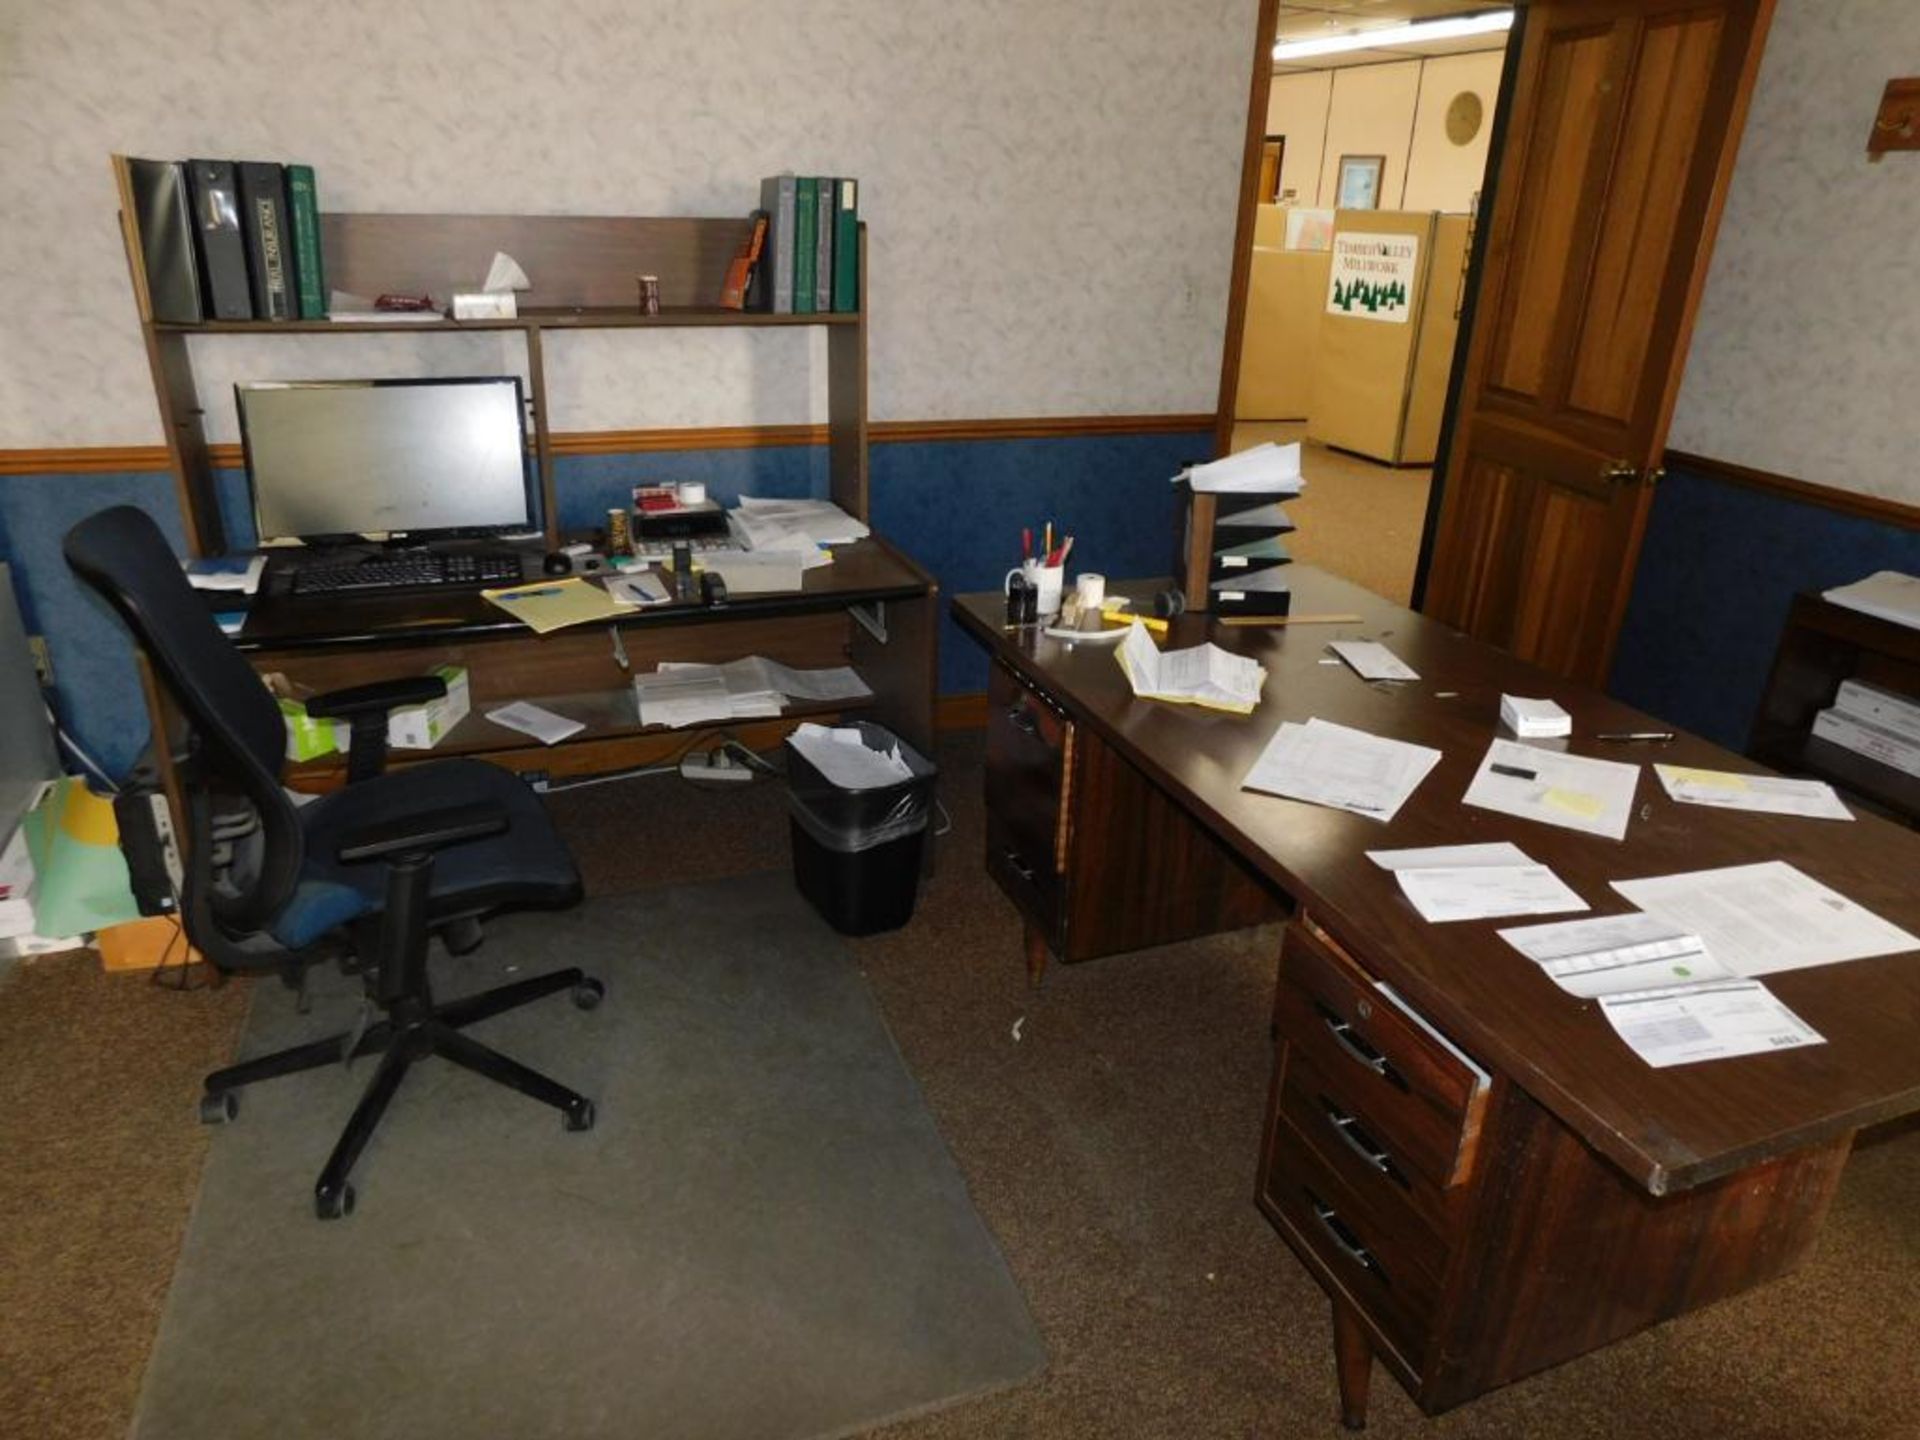 LOT: Contents of Main Office (NO ART, NO ELECTRONICS, NOTHING ATTACHED TO WALLS) - Image 26 of 27